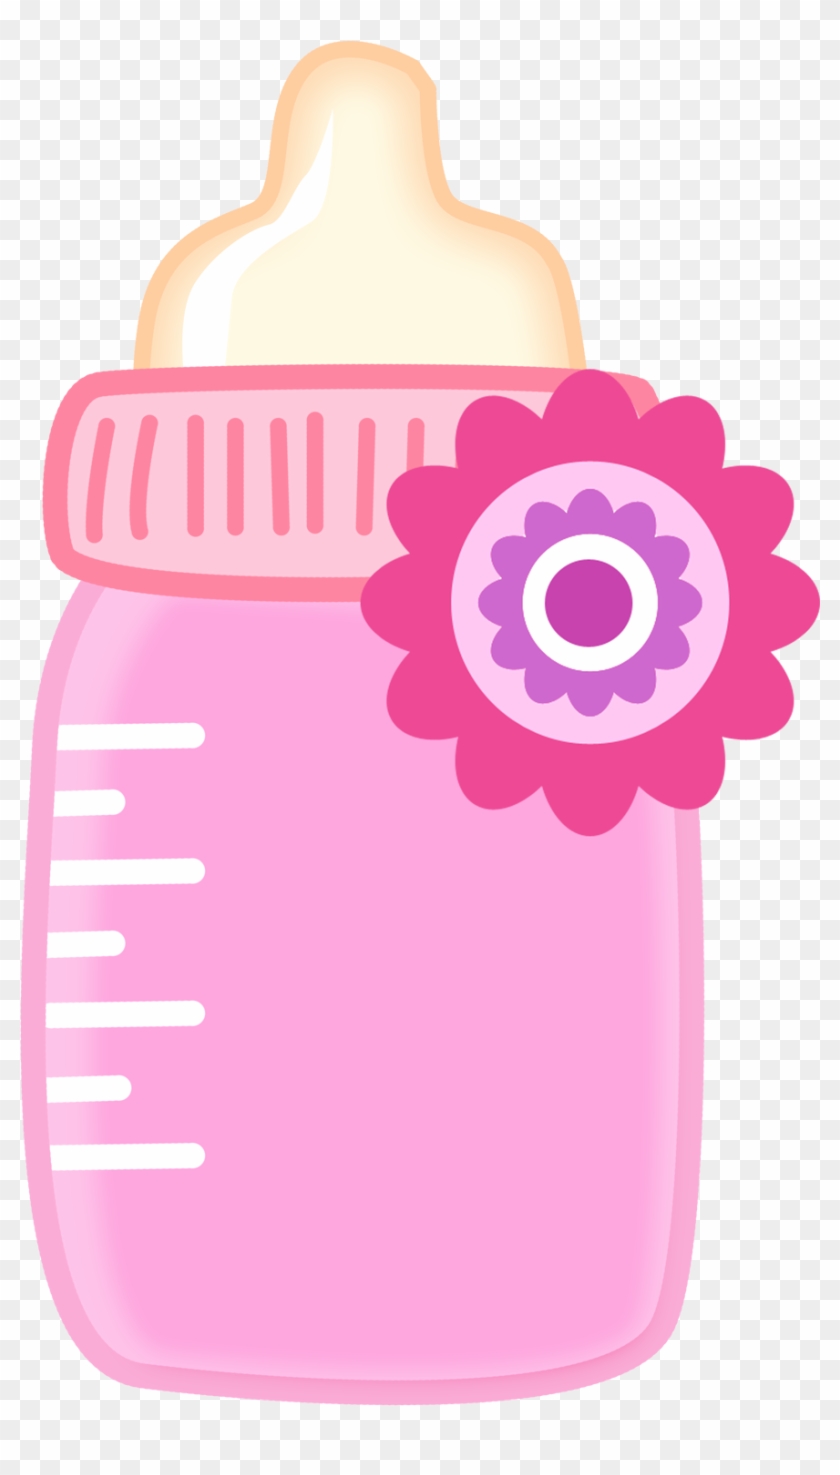 baby bottle Clip art pictures baby girl bottle clipart free transparent png